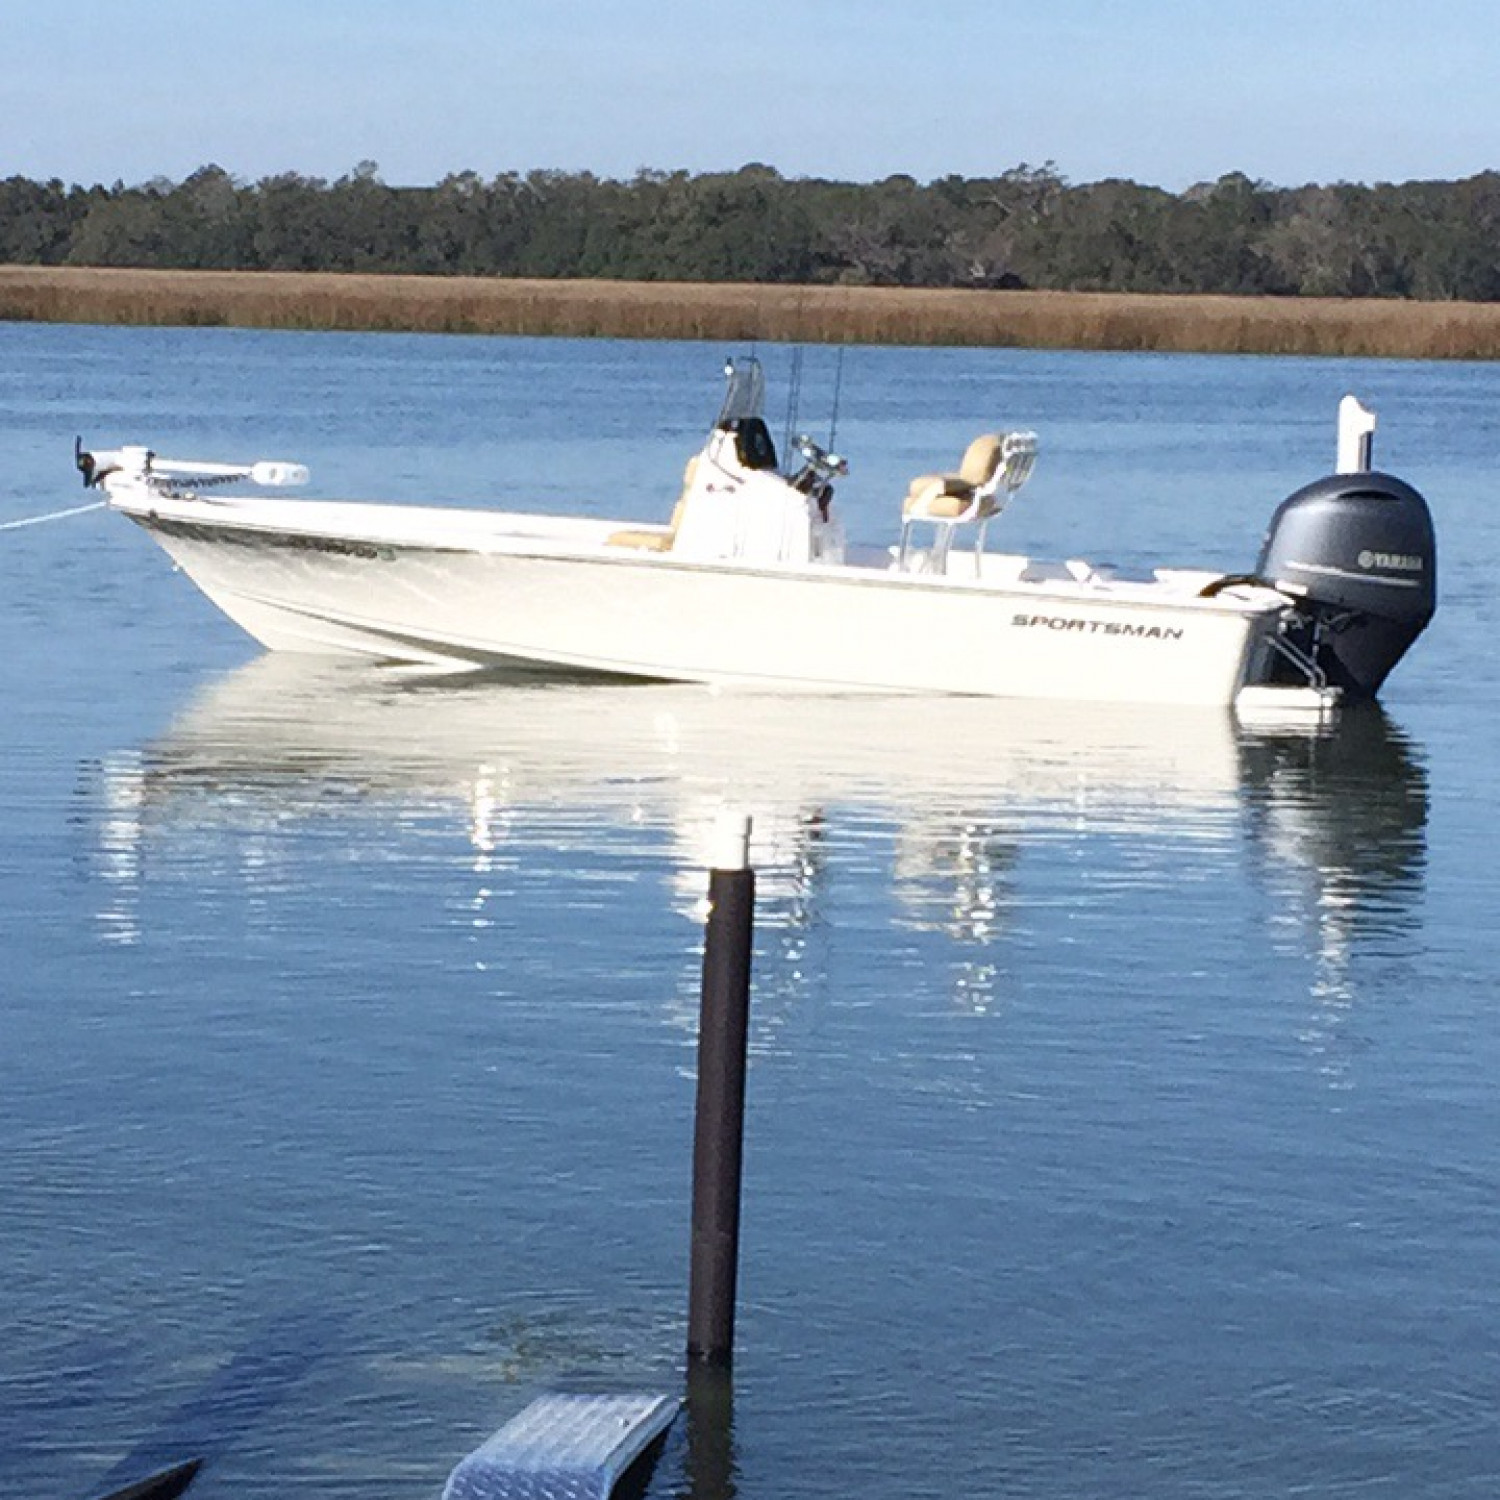 Time to load up after a successful day of wintertime redfishing in the Lowcountry.